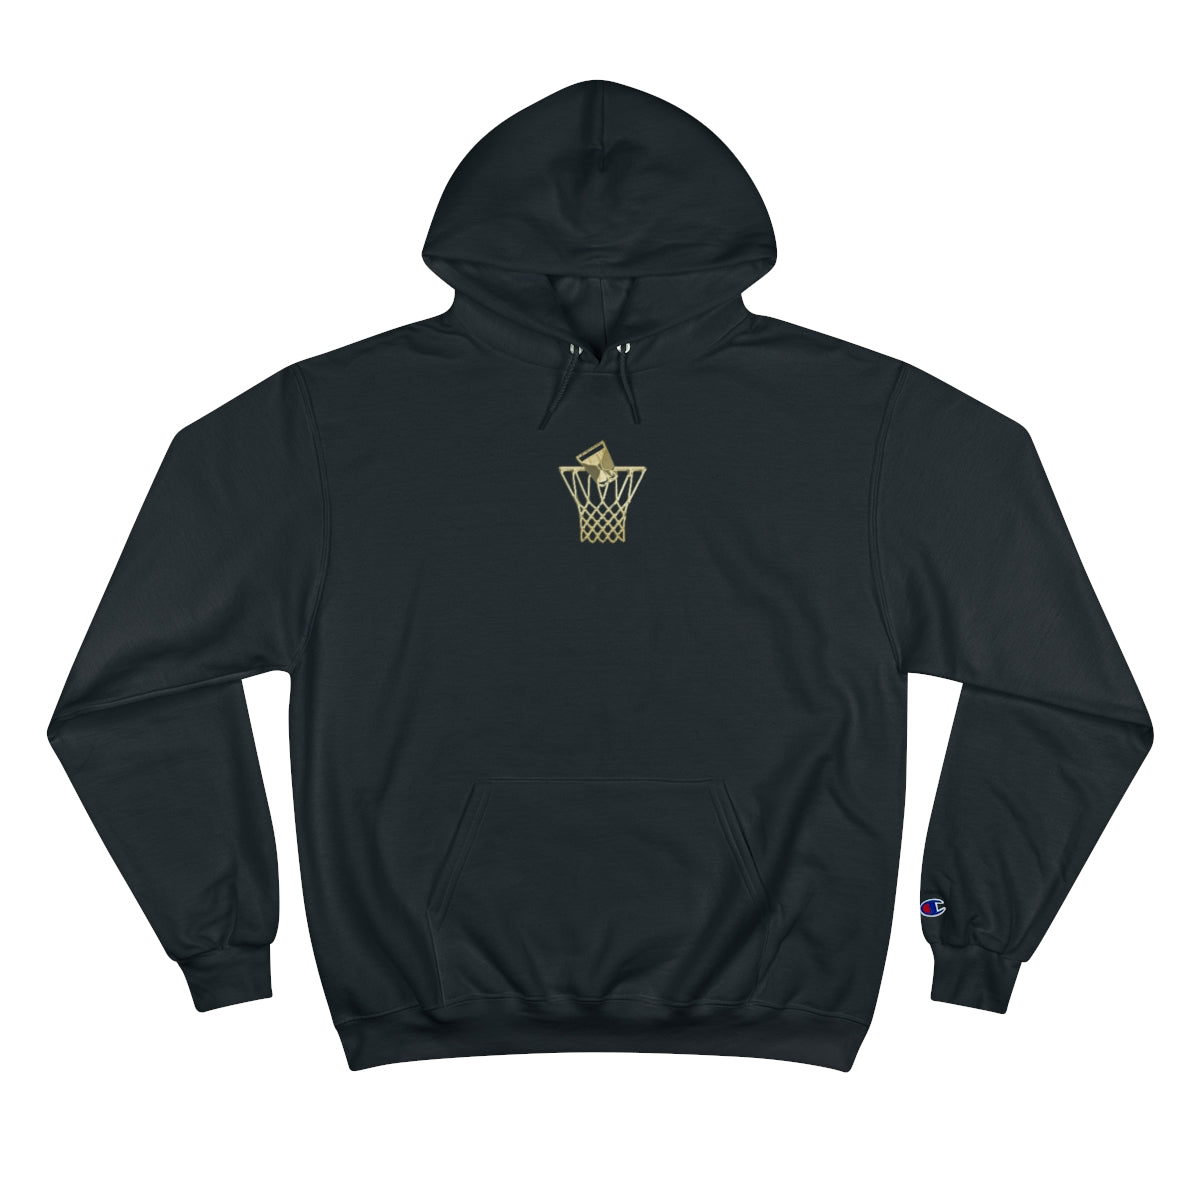 Shoot Your Sports Gold Champion Hoodie